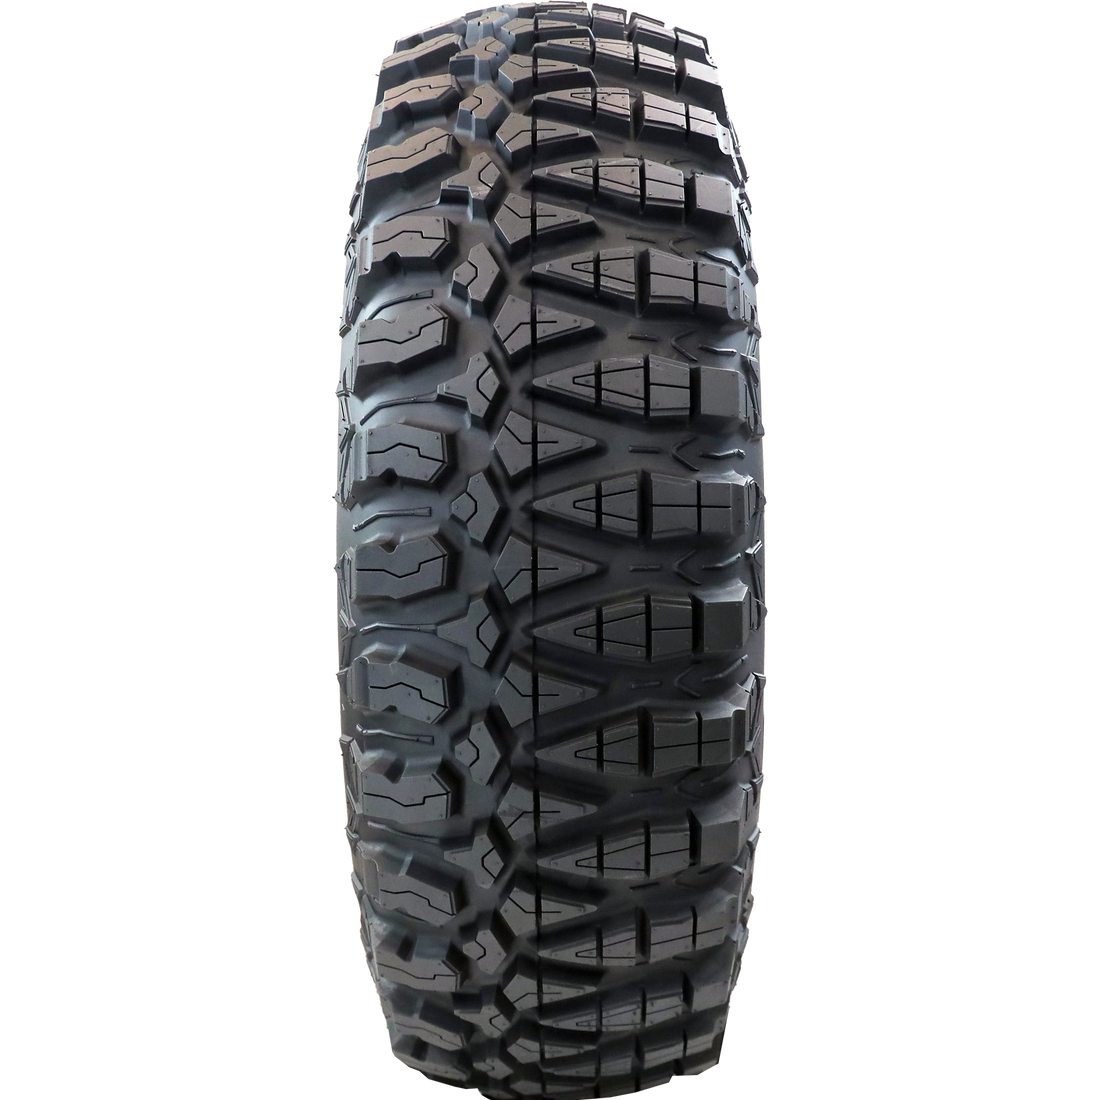 Full frontal view of Terra Master ATV/UTV tire, displaying its unique two distinct tread patterns. The user can alternate sides for improved traction in either hard or soft-to-intermediate terrains, offering versatile performance for diverse off-road experiences.